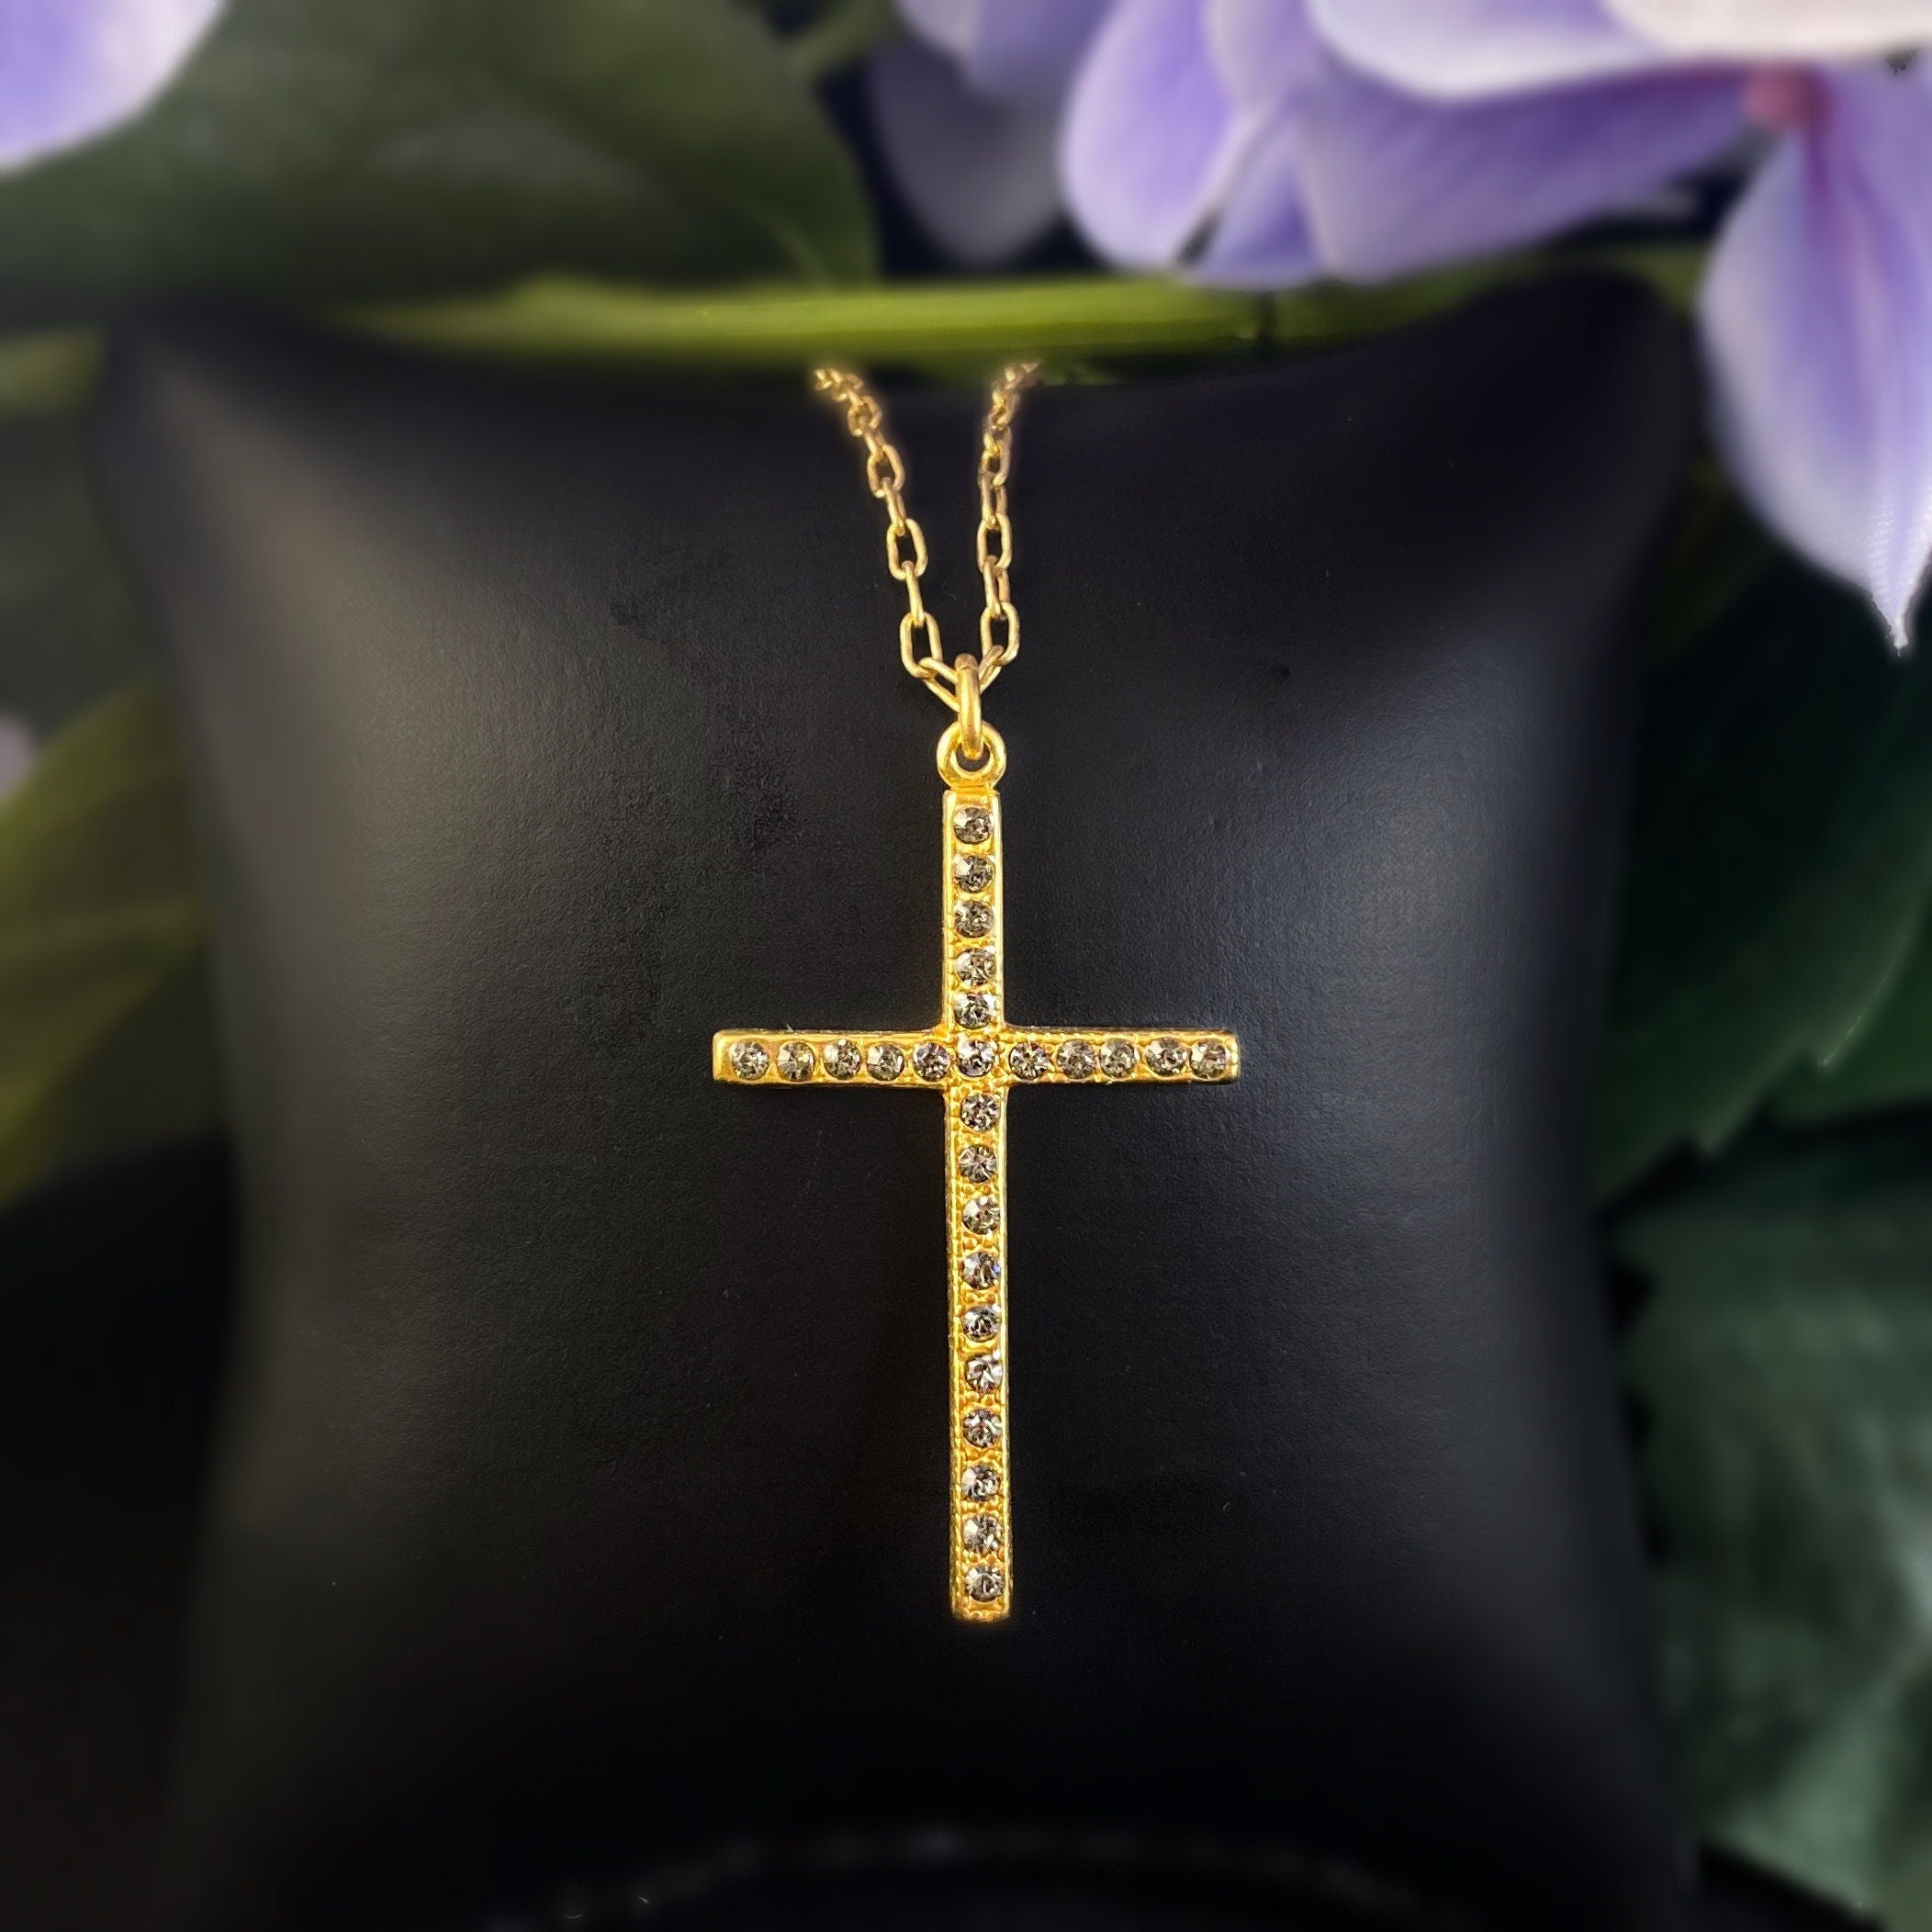 Buy Vintage Cross Pendant With Swarovski Crystals 16 Inch White Gold Silver  Plated Pendant Necklace N624-W Limited Stock Never Worn Online in India -  Etsy